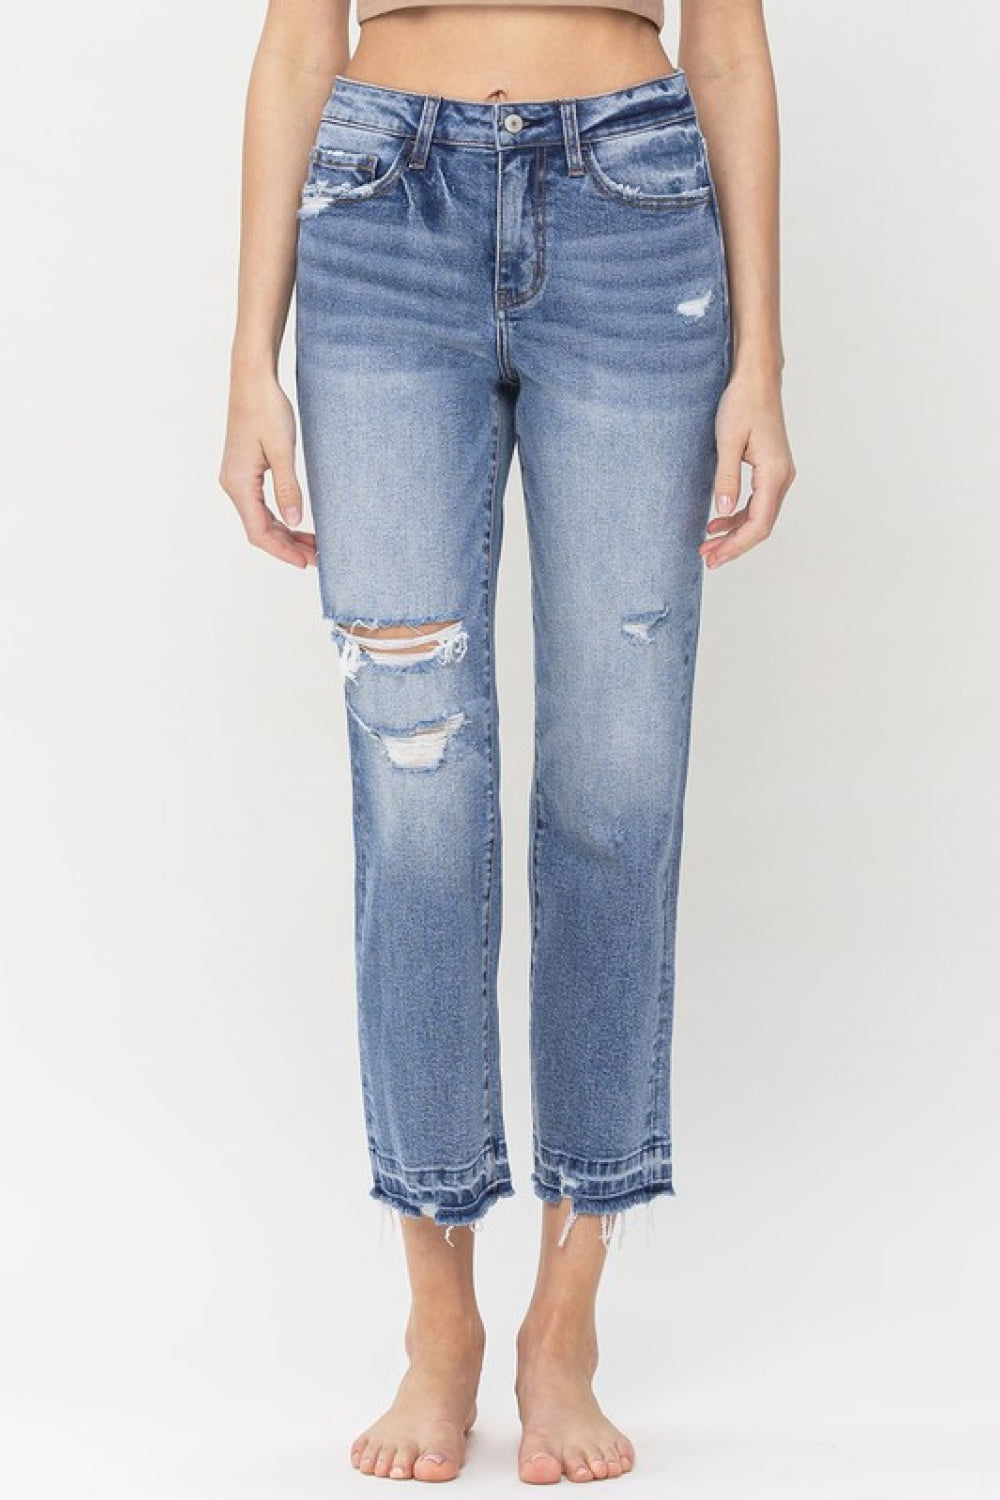 Lovervet Full Size Lena High Rise Crop Straight Jeans - The Downtown Dachshund